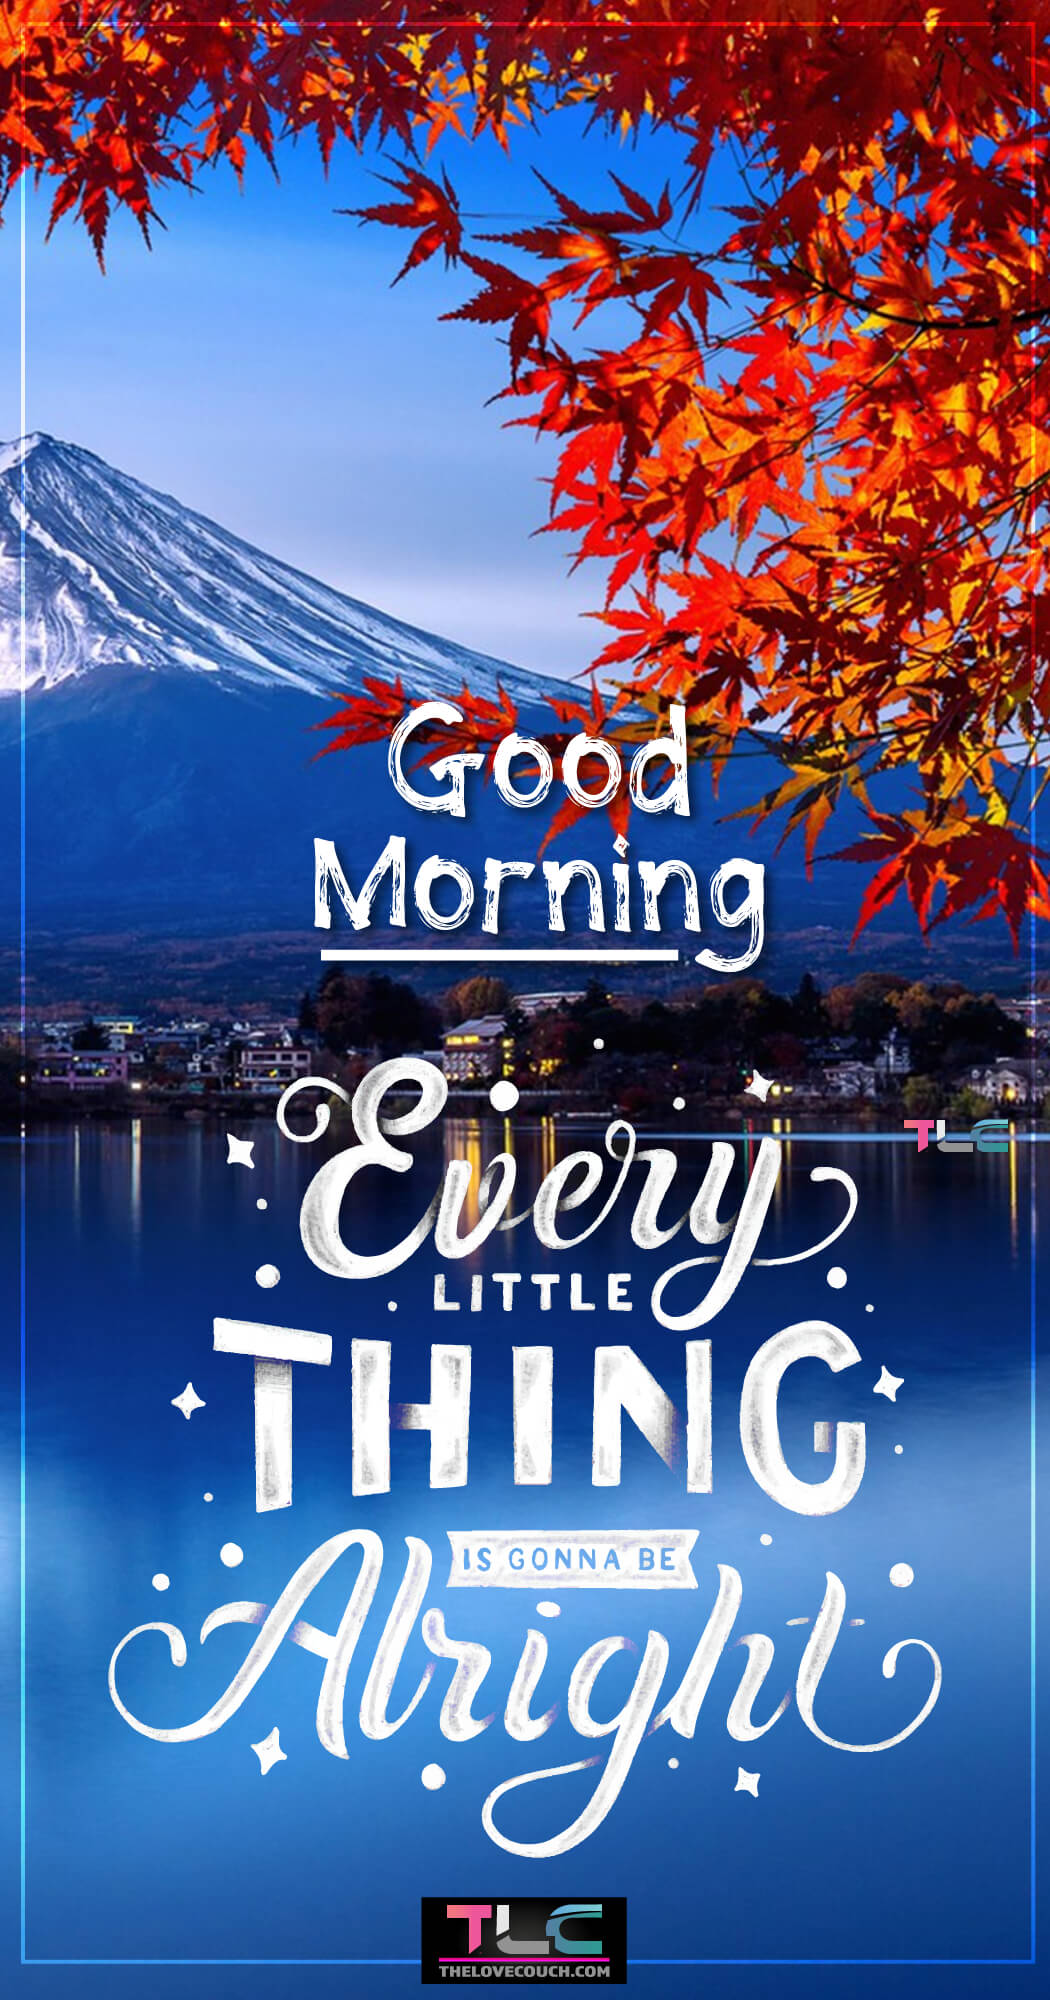 Every little thing is gonna be alright! - Good Morning Images